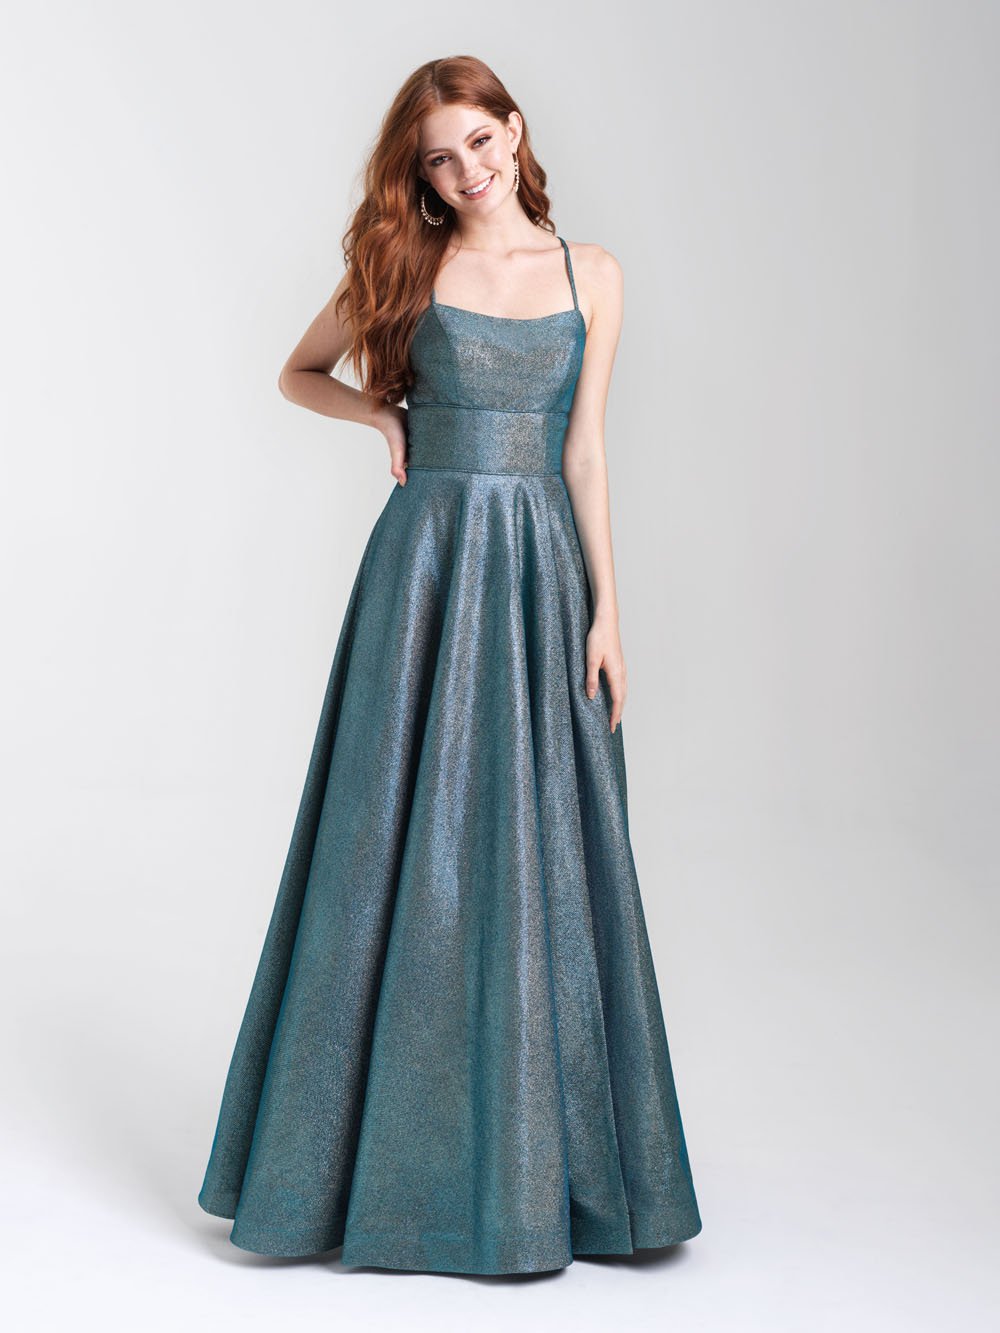 Madison James 20-381 dress images in these colors: Turquoise, Purple, Copper Rose.